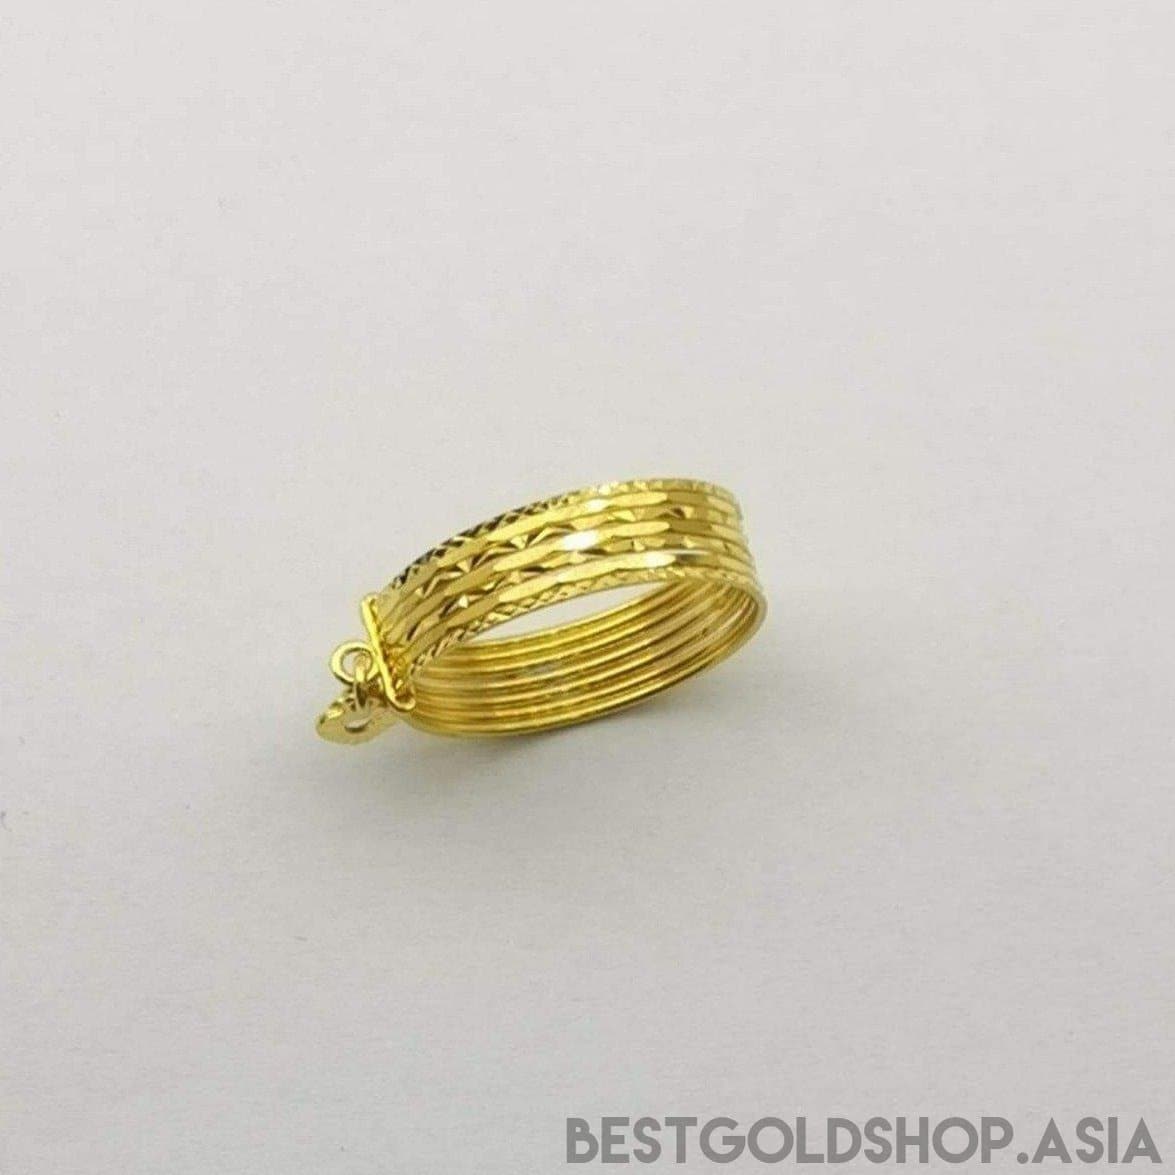 22K Gold 7 in 1 Ring with dangling heart-916 gold-Best Gold Shop